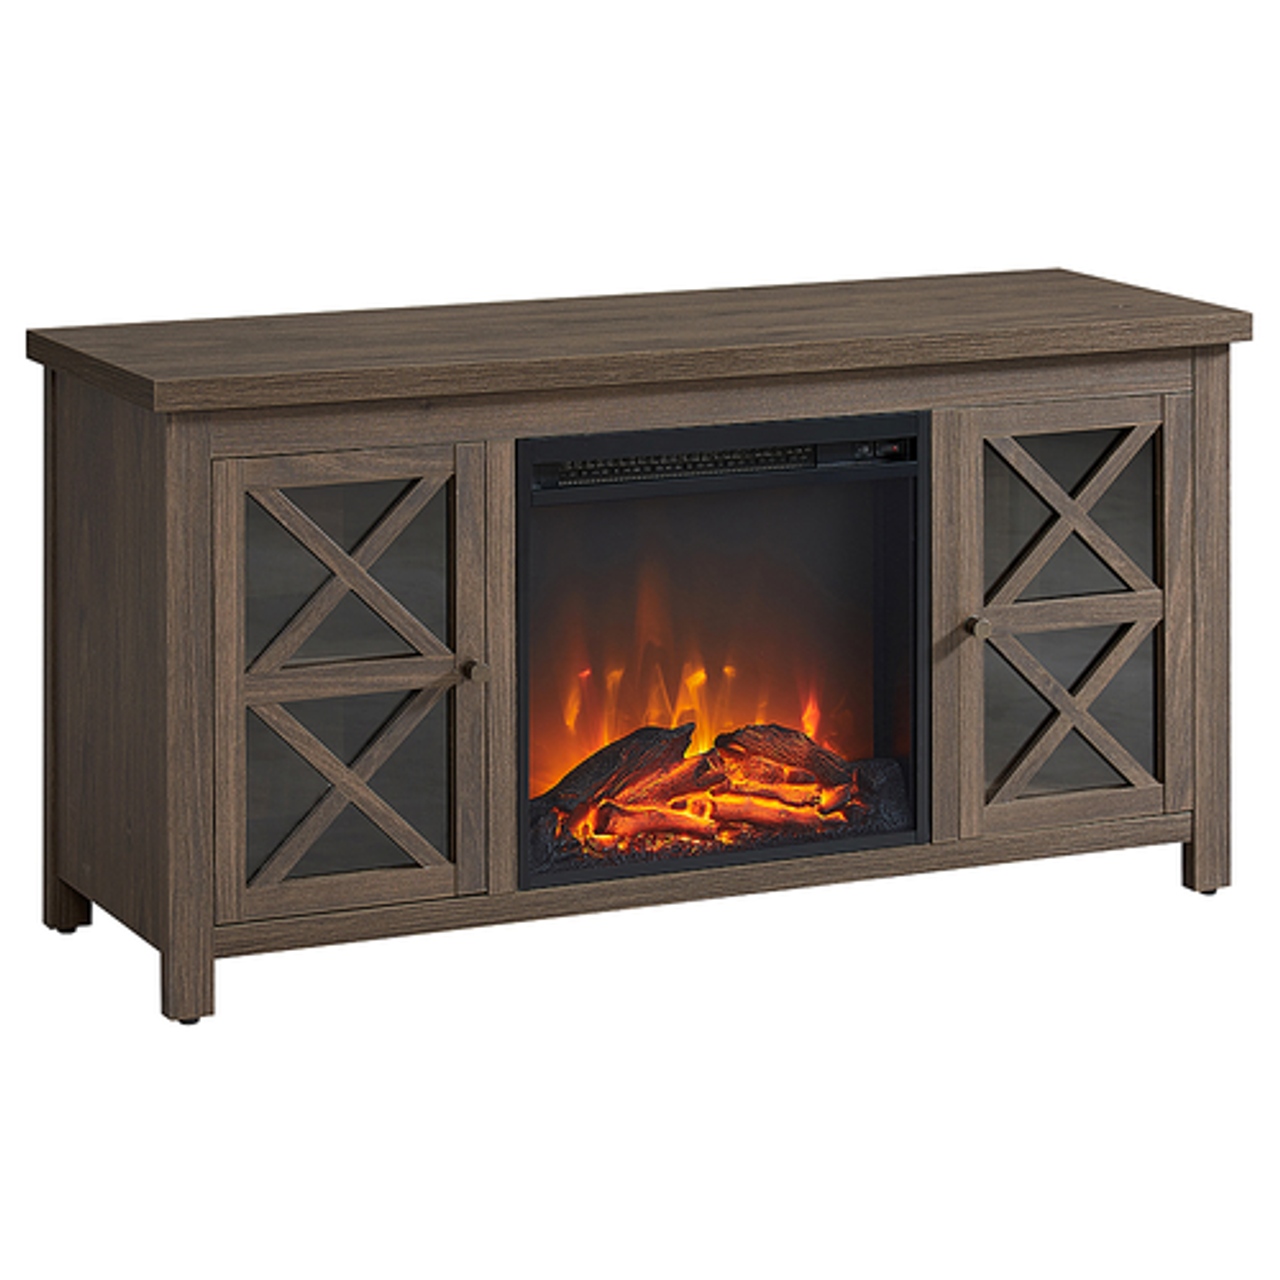 Camden&Wells - Colton Log Fireplace TV Stand for TVs up to 55" - Alder Brown